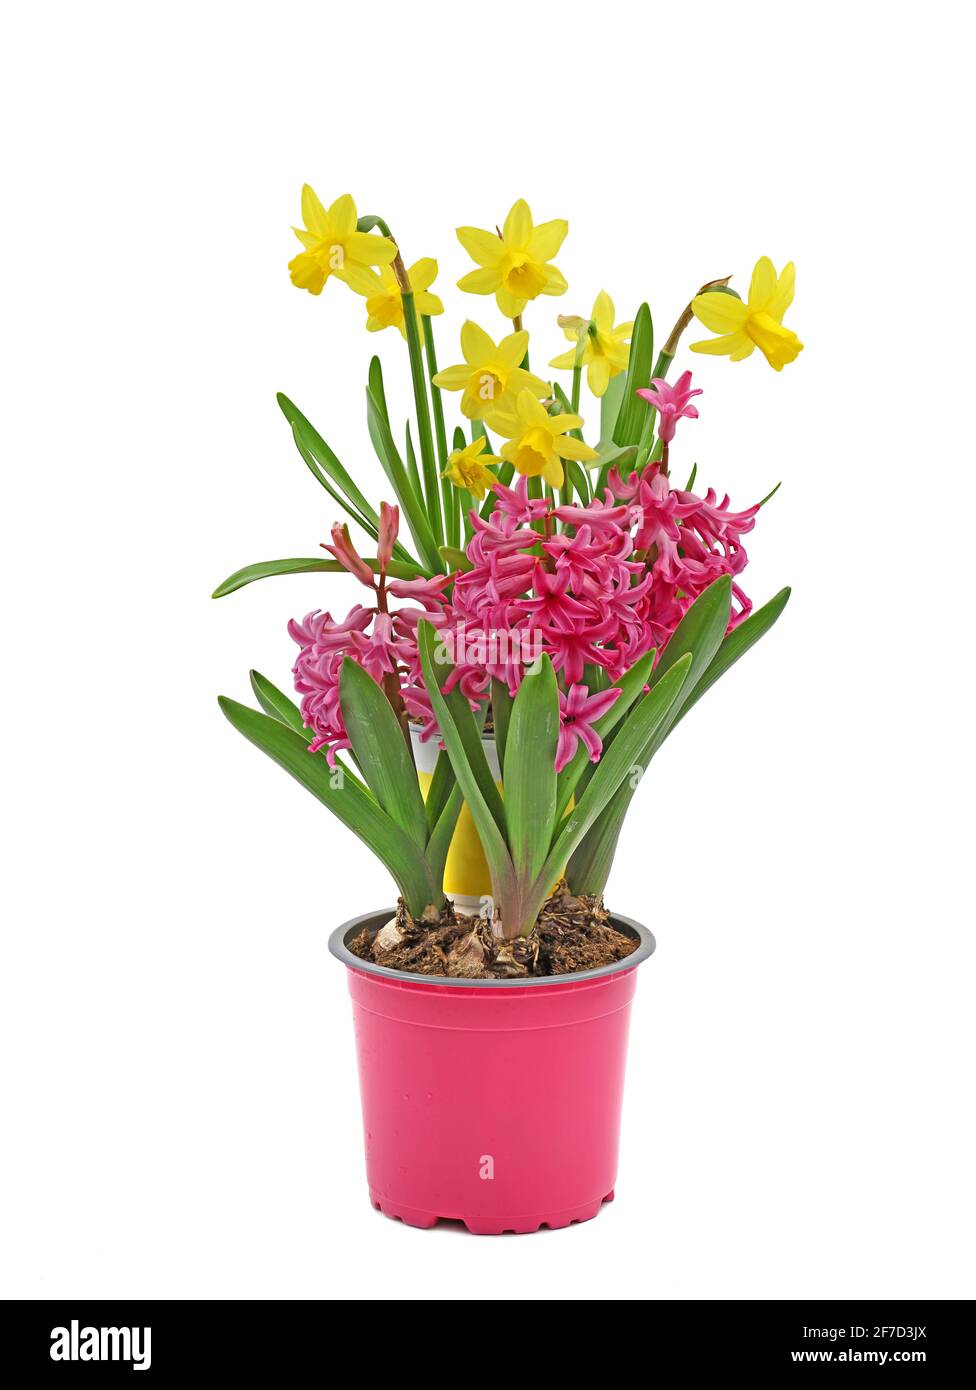 pink hyacinth flowers and yellow daffodils arrangement in pots isolated on white background Stock Photo